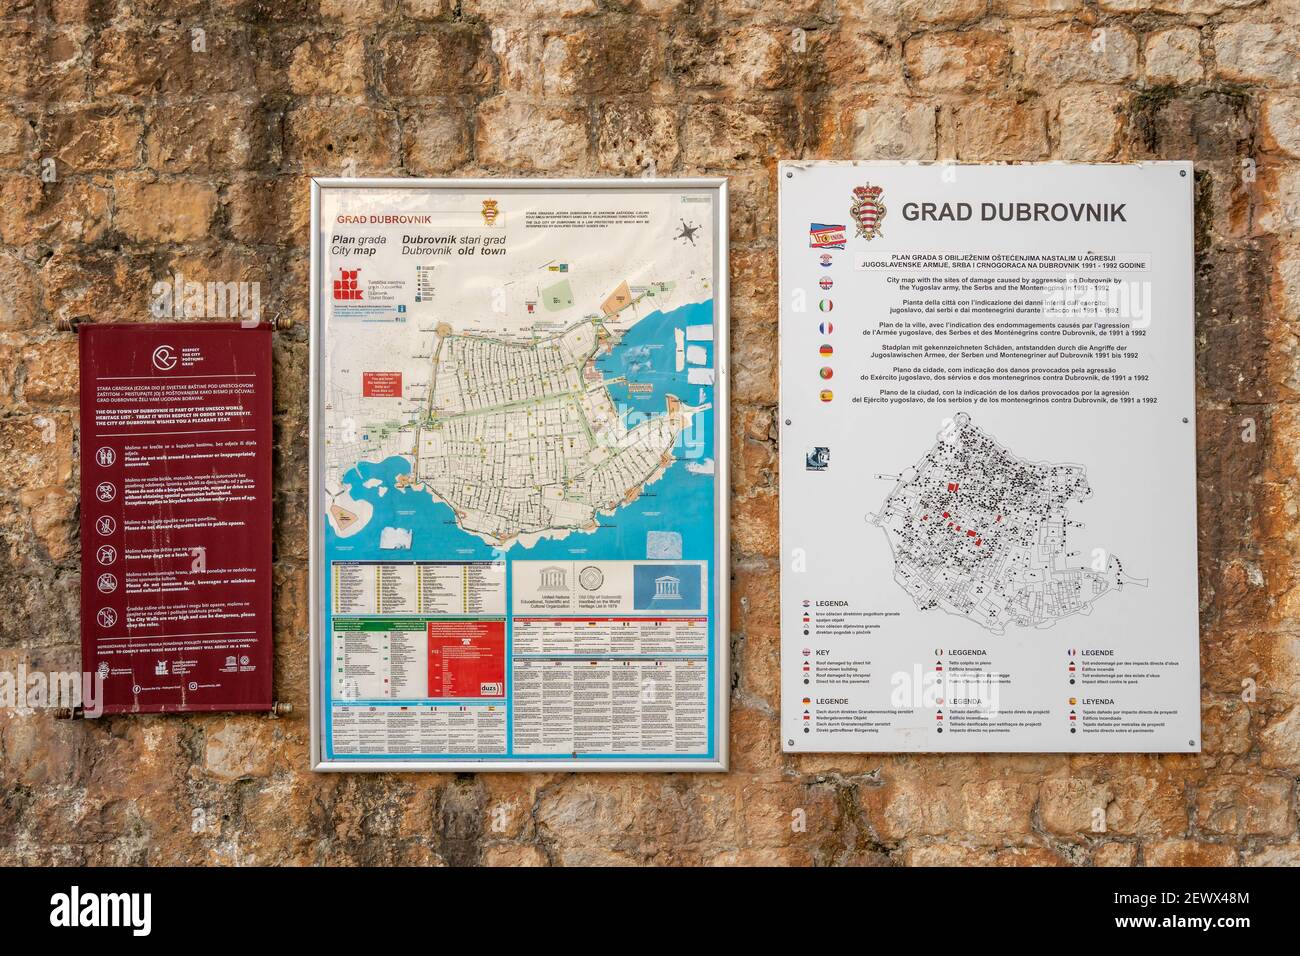 Dubrovnik, Croatia - Aug 22, 2020: Intraduction and map of old town to west entrance Pile gate Stock Photo